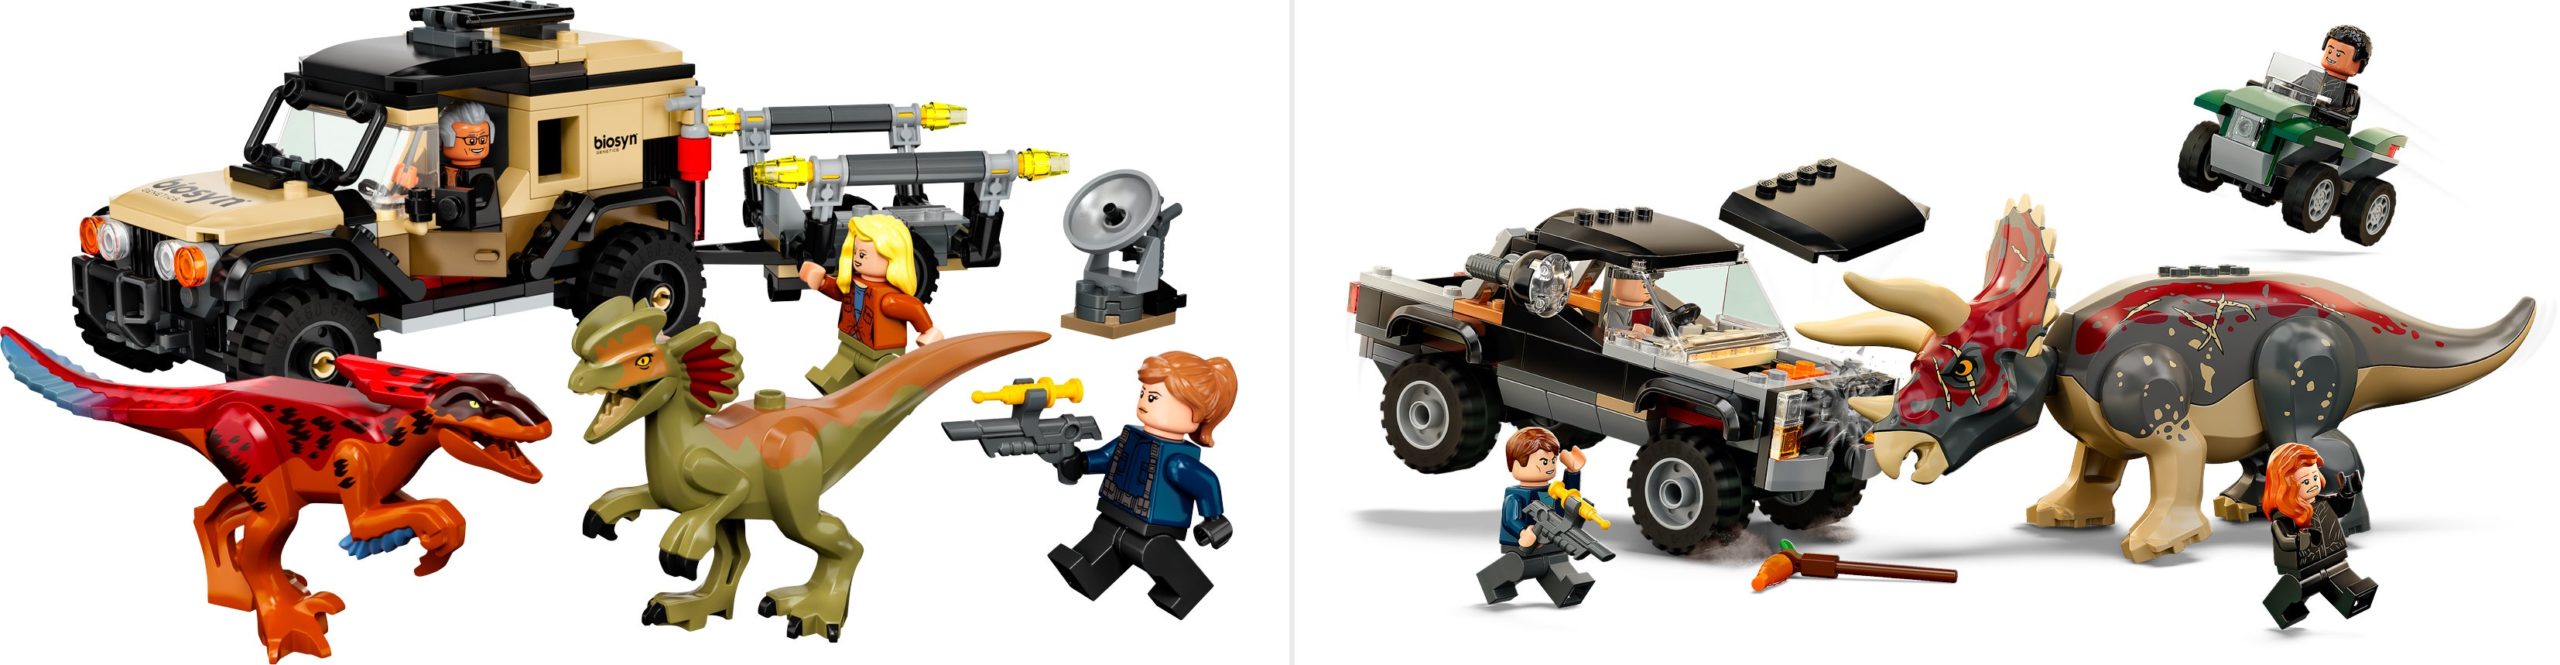 The Best Jurassic World: Dominion Lego Set Is a Throwback to the Original Jurassic Park